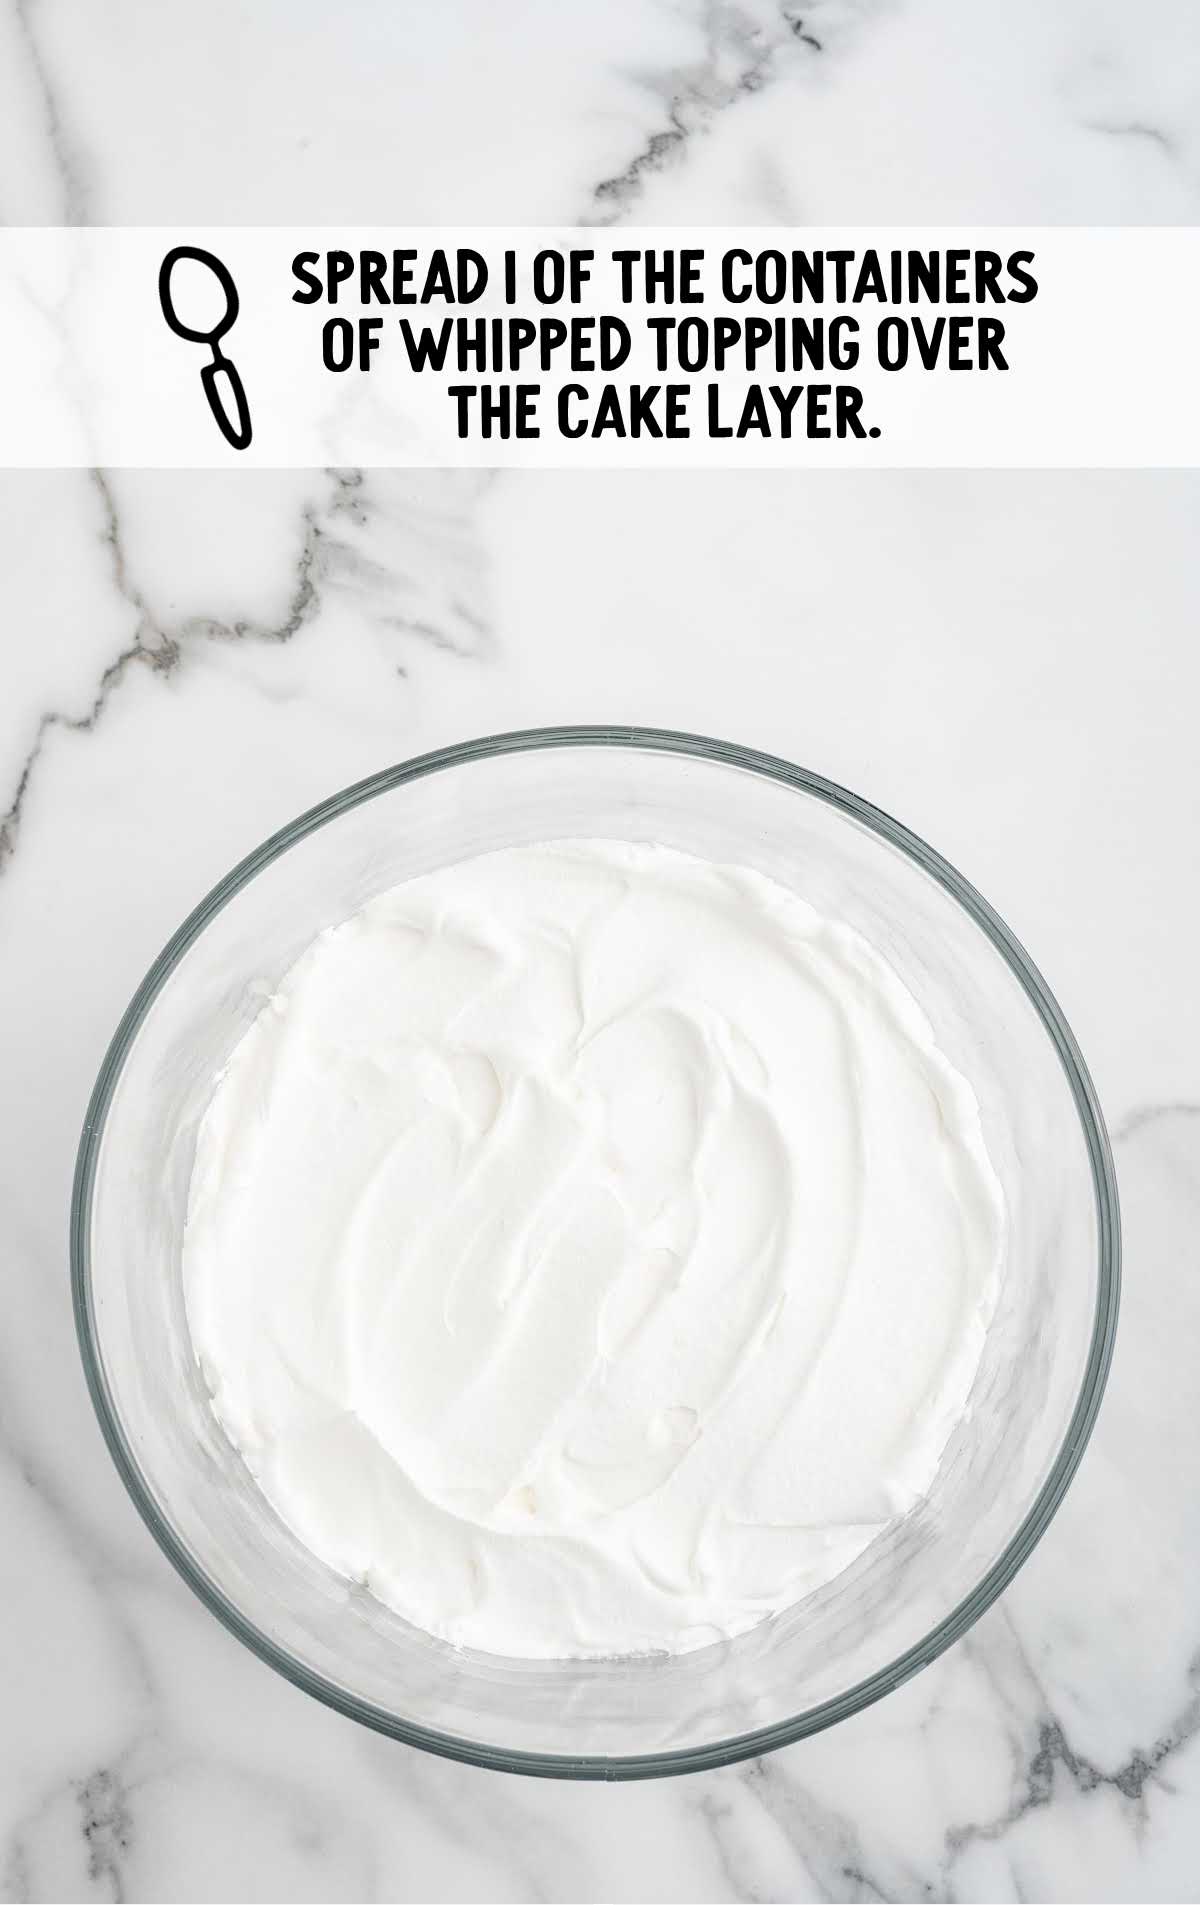 whipped topping spread over the cake layer